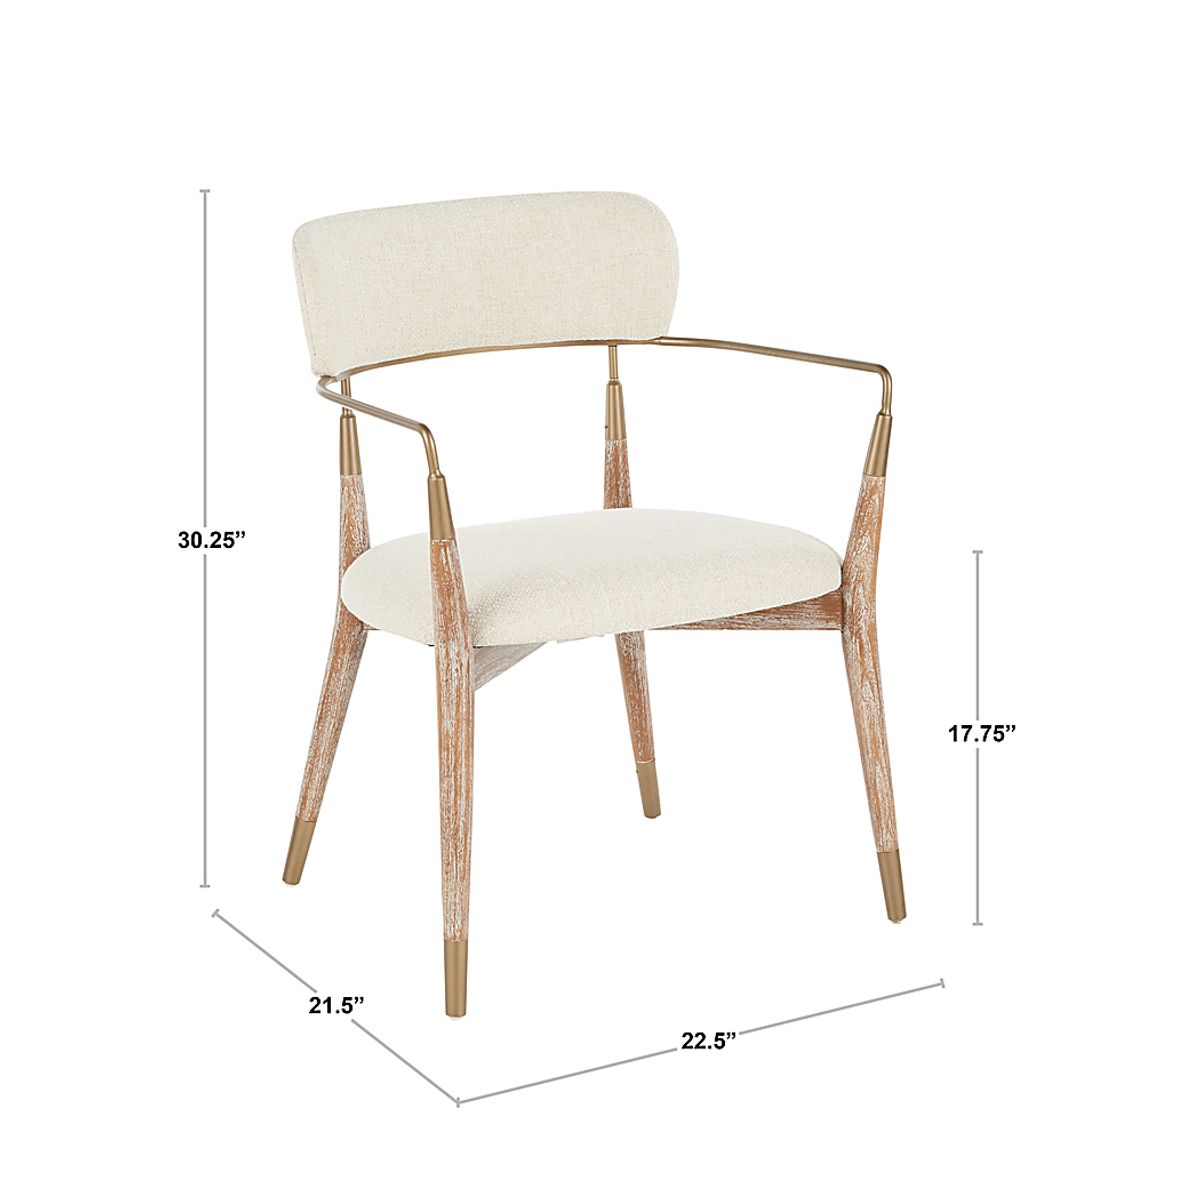 Mackling Cream Colors,Light Wood,White Arm Chair, Set Of 2 | Rooms to Go